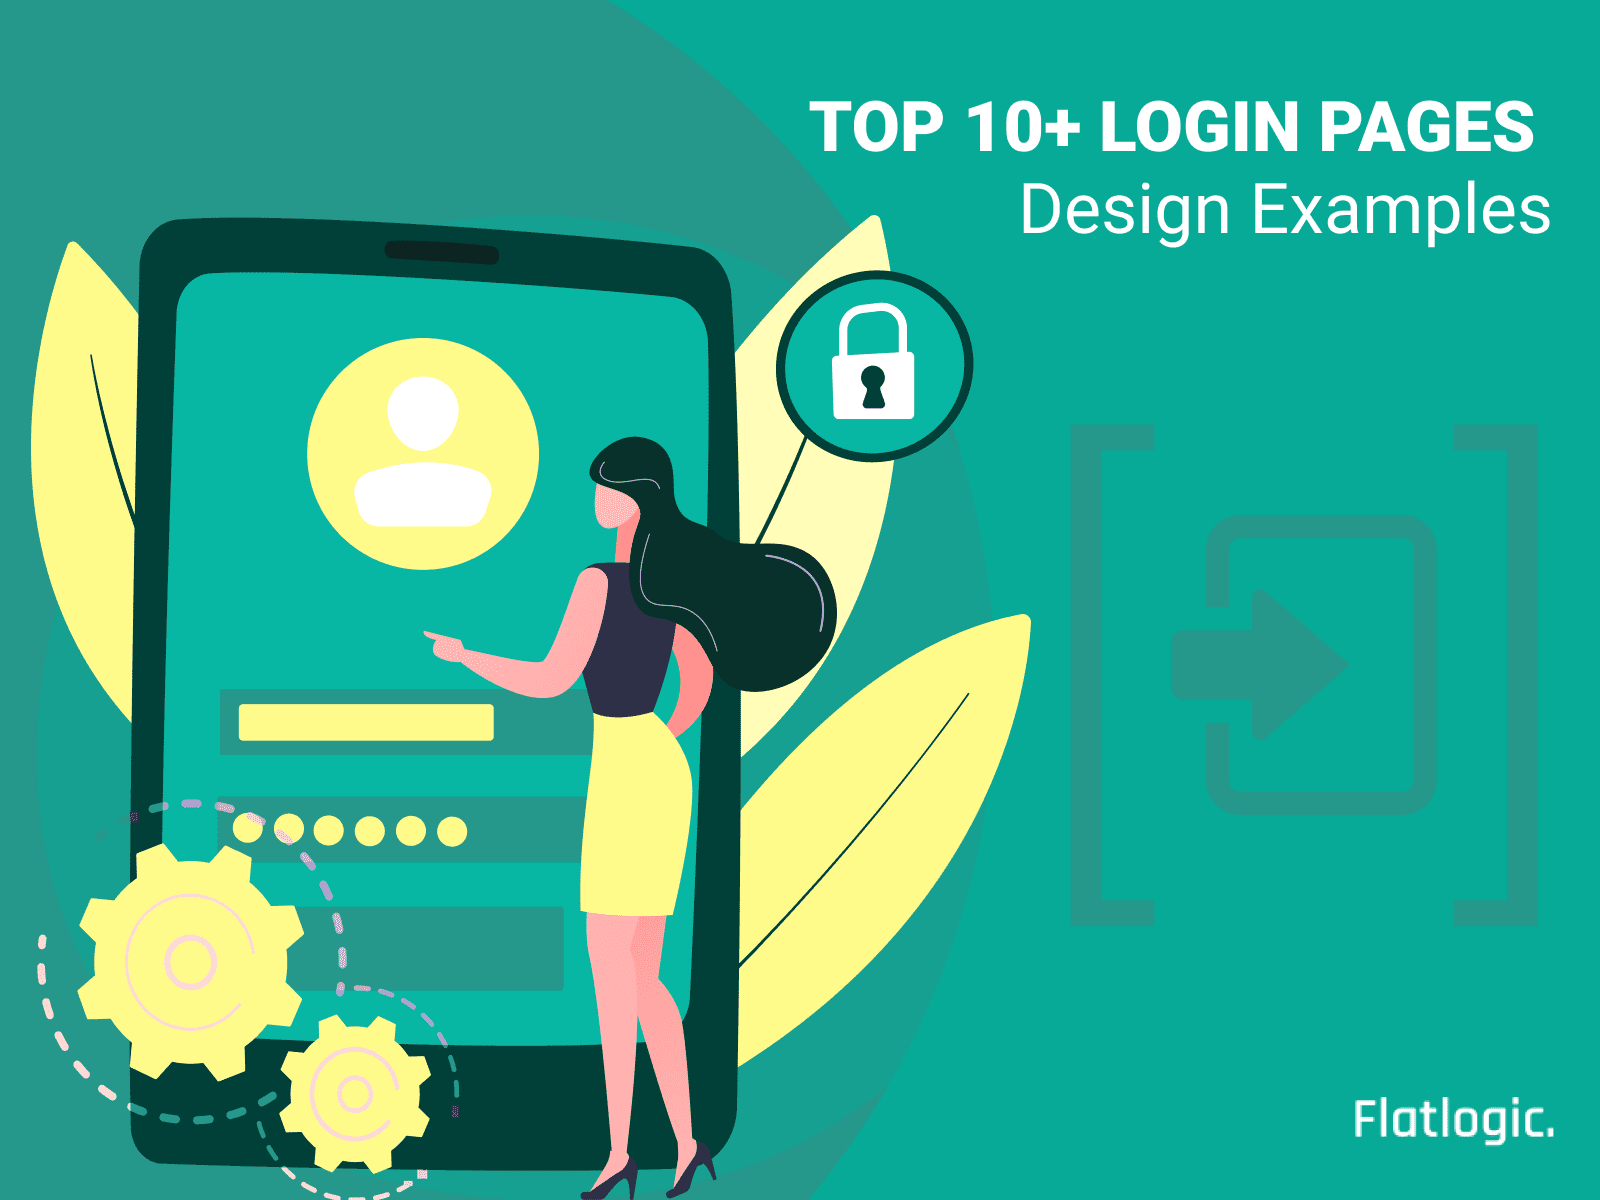 Top 13+ Login Pages Design Examples